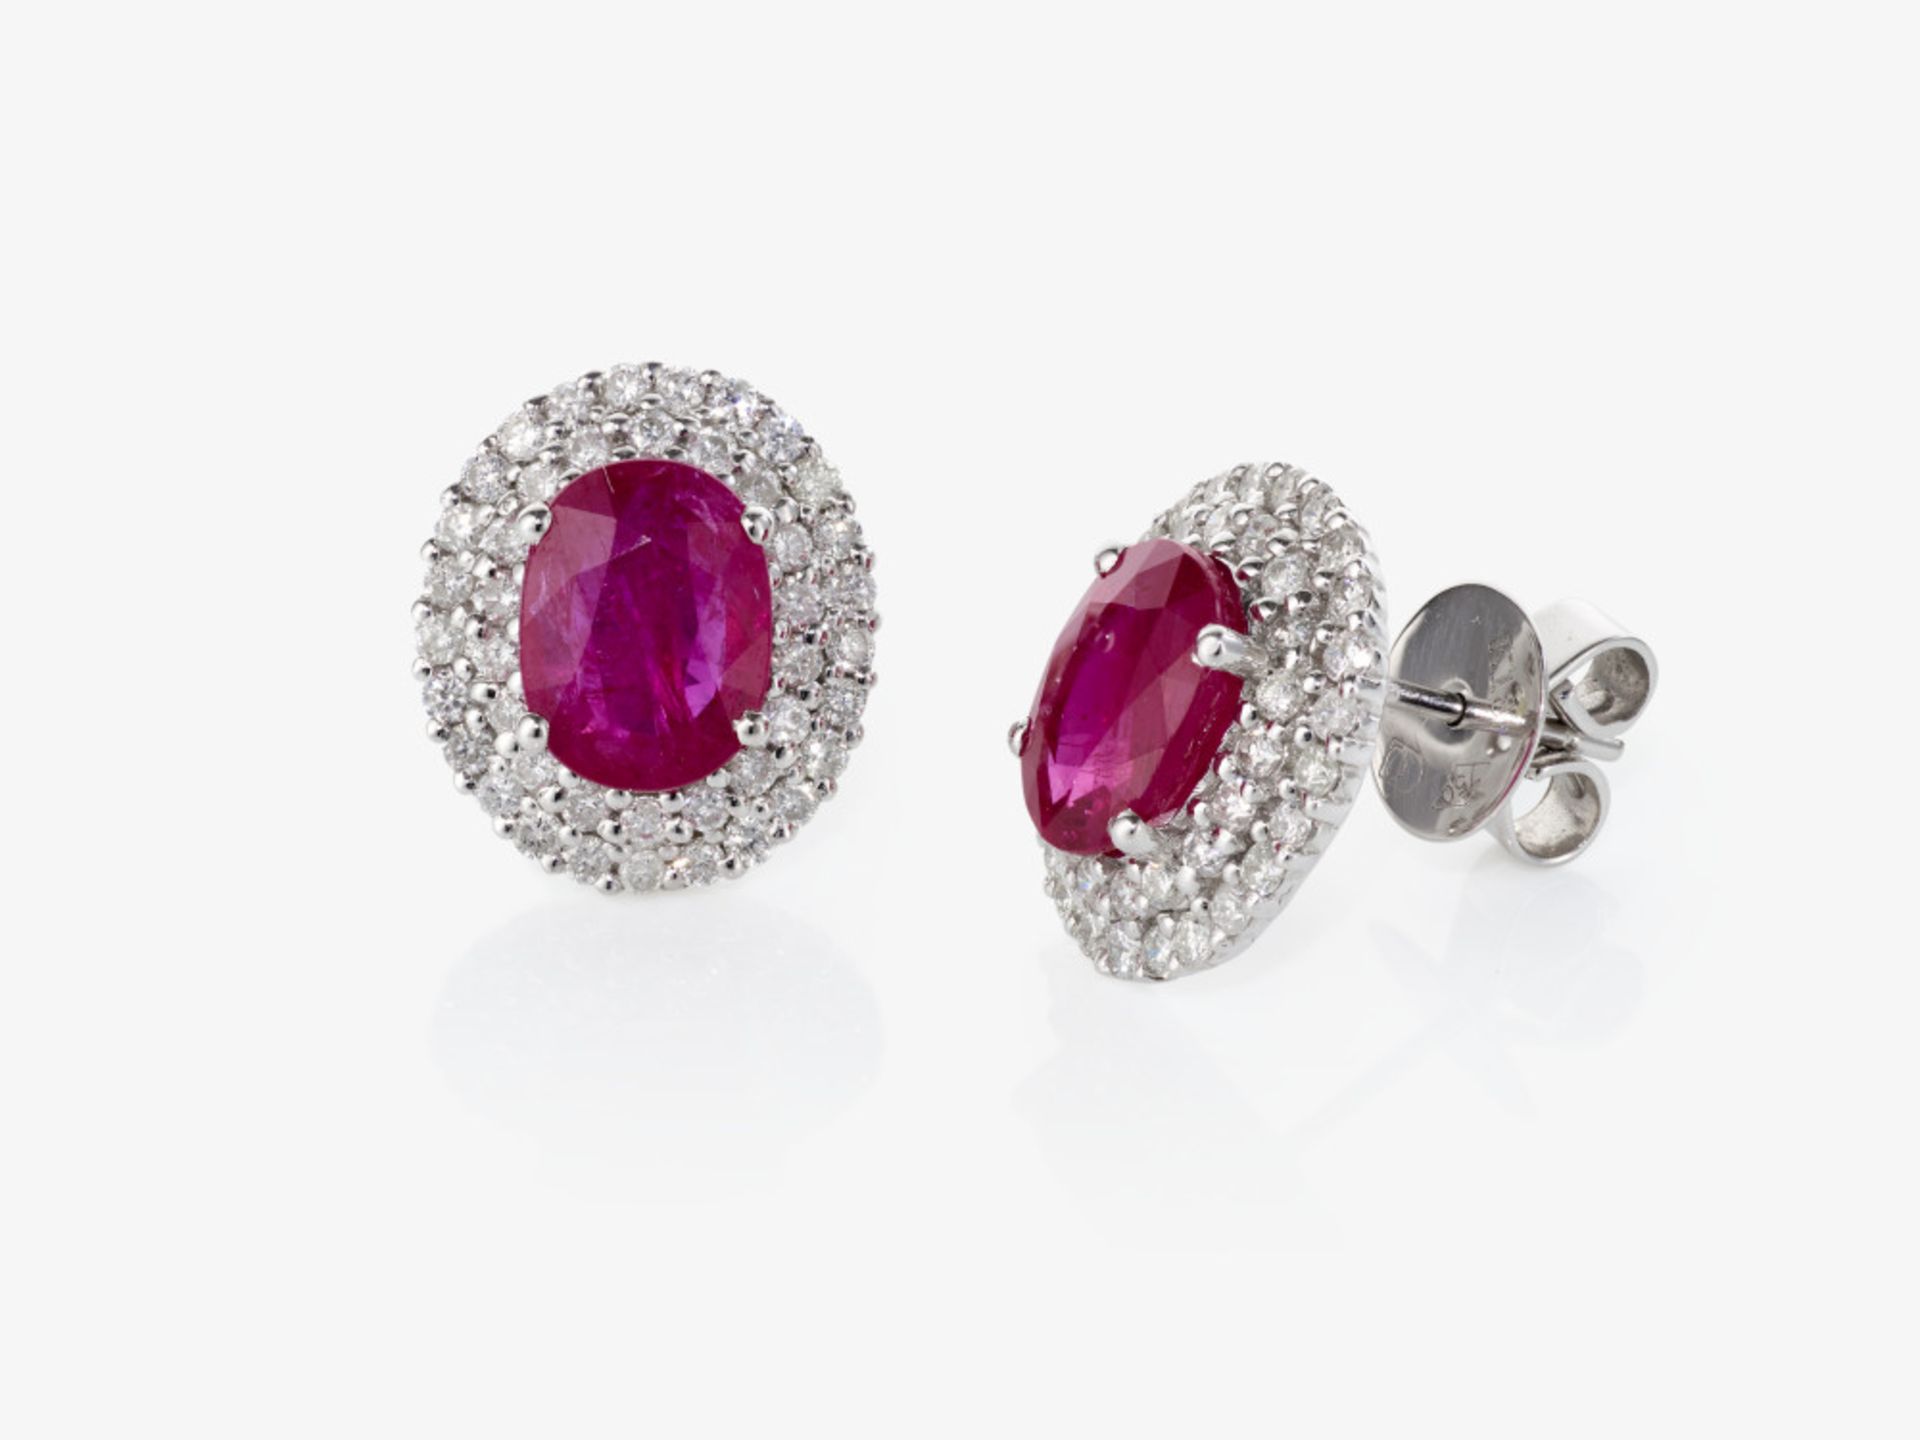 A pair of stud earrings decorated with brilliant-cut diamonds and rubies - Image 2 of 2